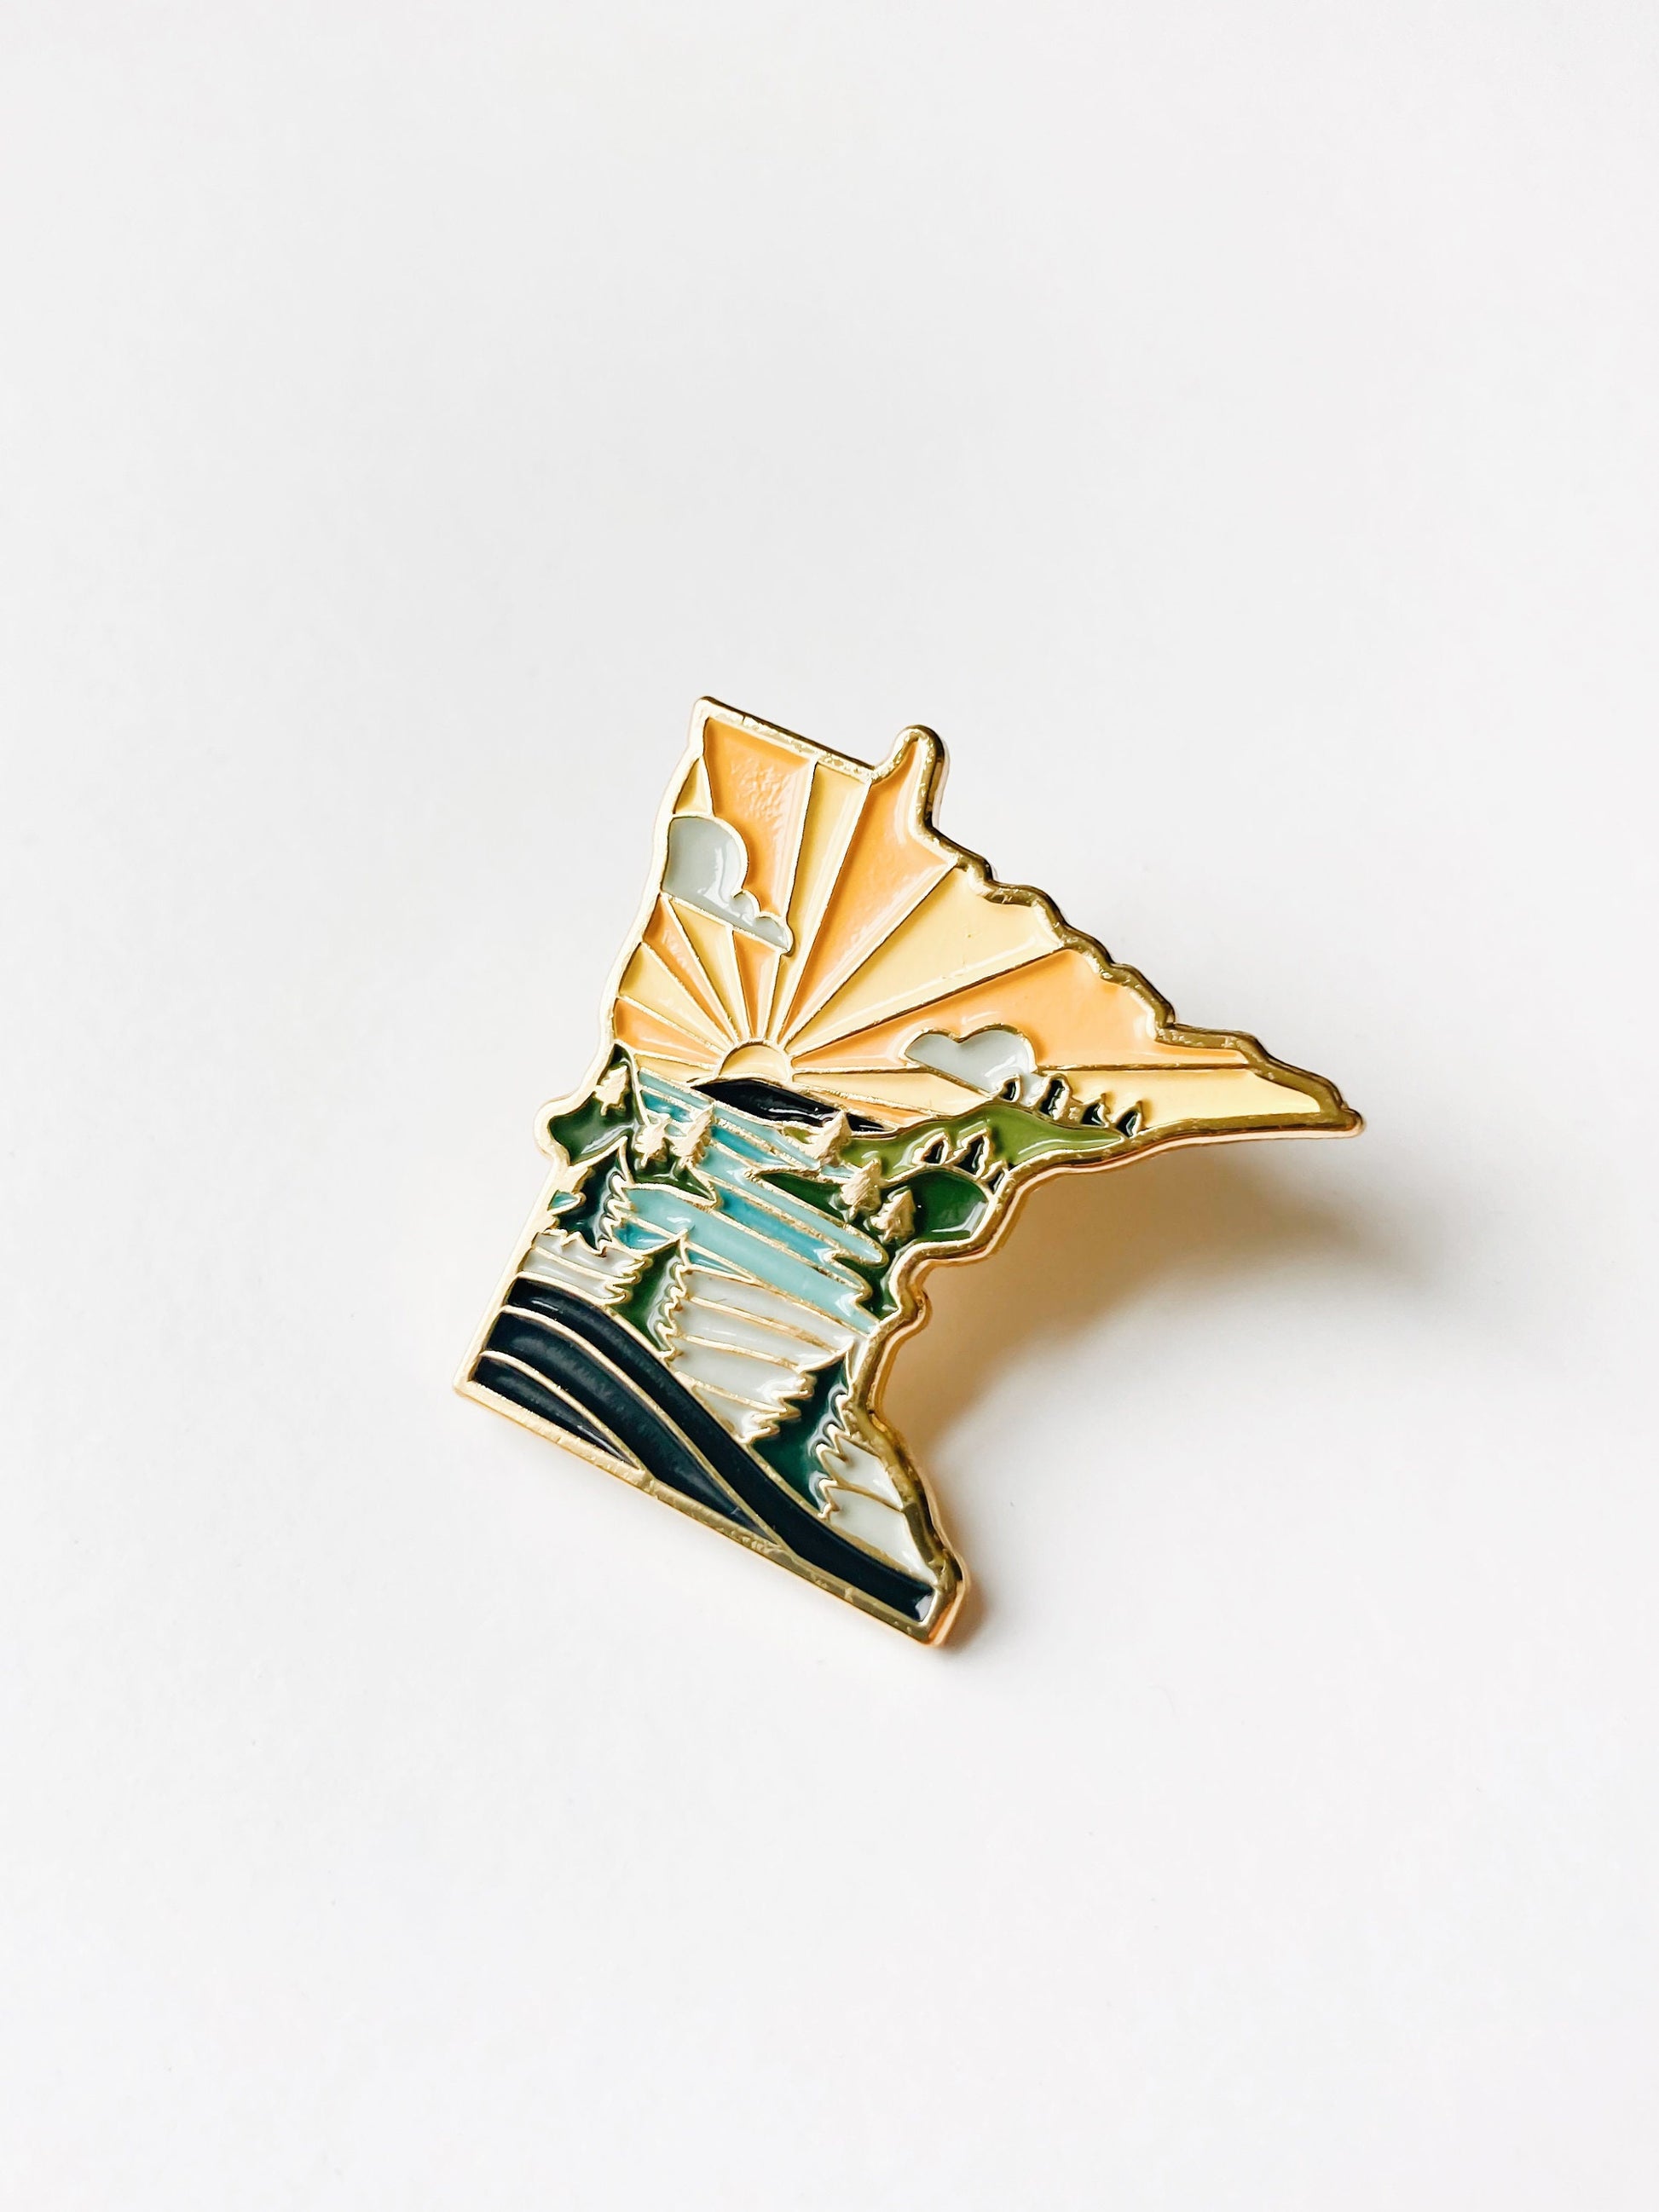 Minnesota Enamel Pin | Gold Soft Enamel Pin | Illustrated United State Pin | Butterfly Clasp | 1.25"